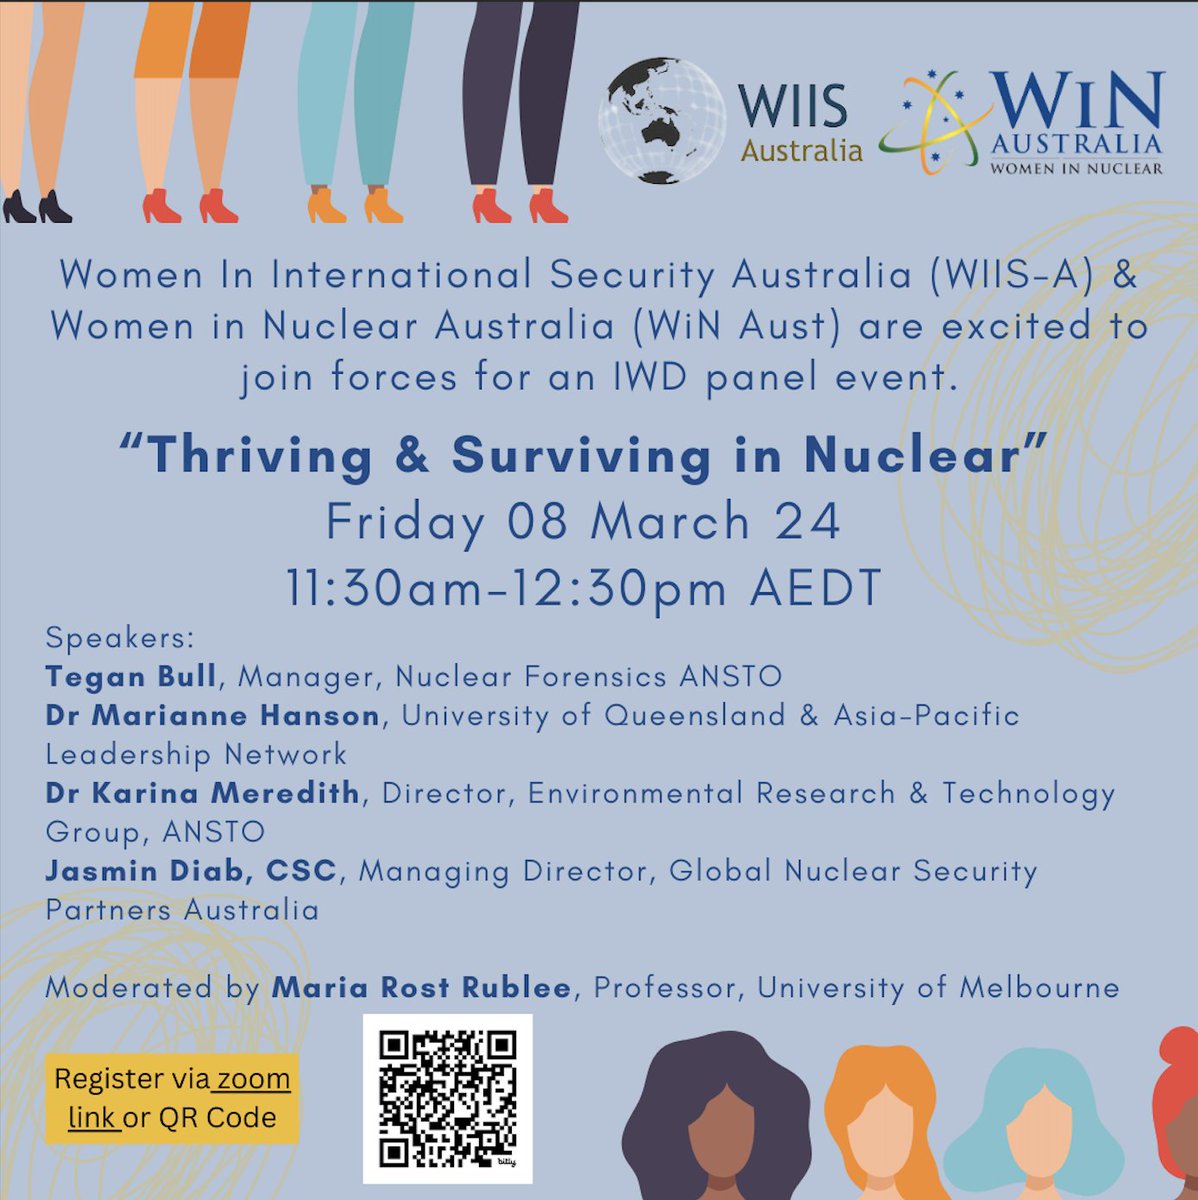 Don't miss APLN member Marianne Hanson on the panel for @WIIS_Aus and @WiN_Australia's upcoming event, 'Thriving & Surviving in Nuclear.' The group, moderated by @mariarostrublee, will gather on #InternationalWomensDay to discuss their experiences as women in nuclear security.